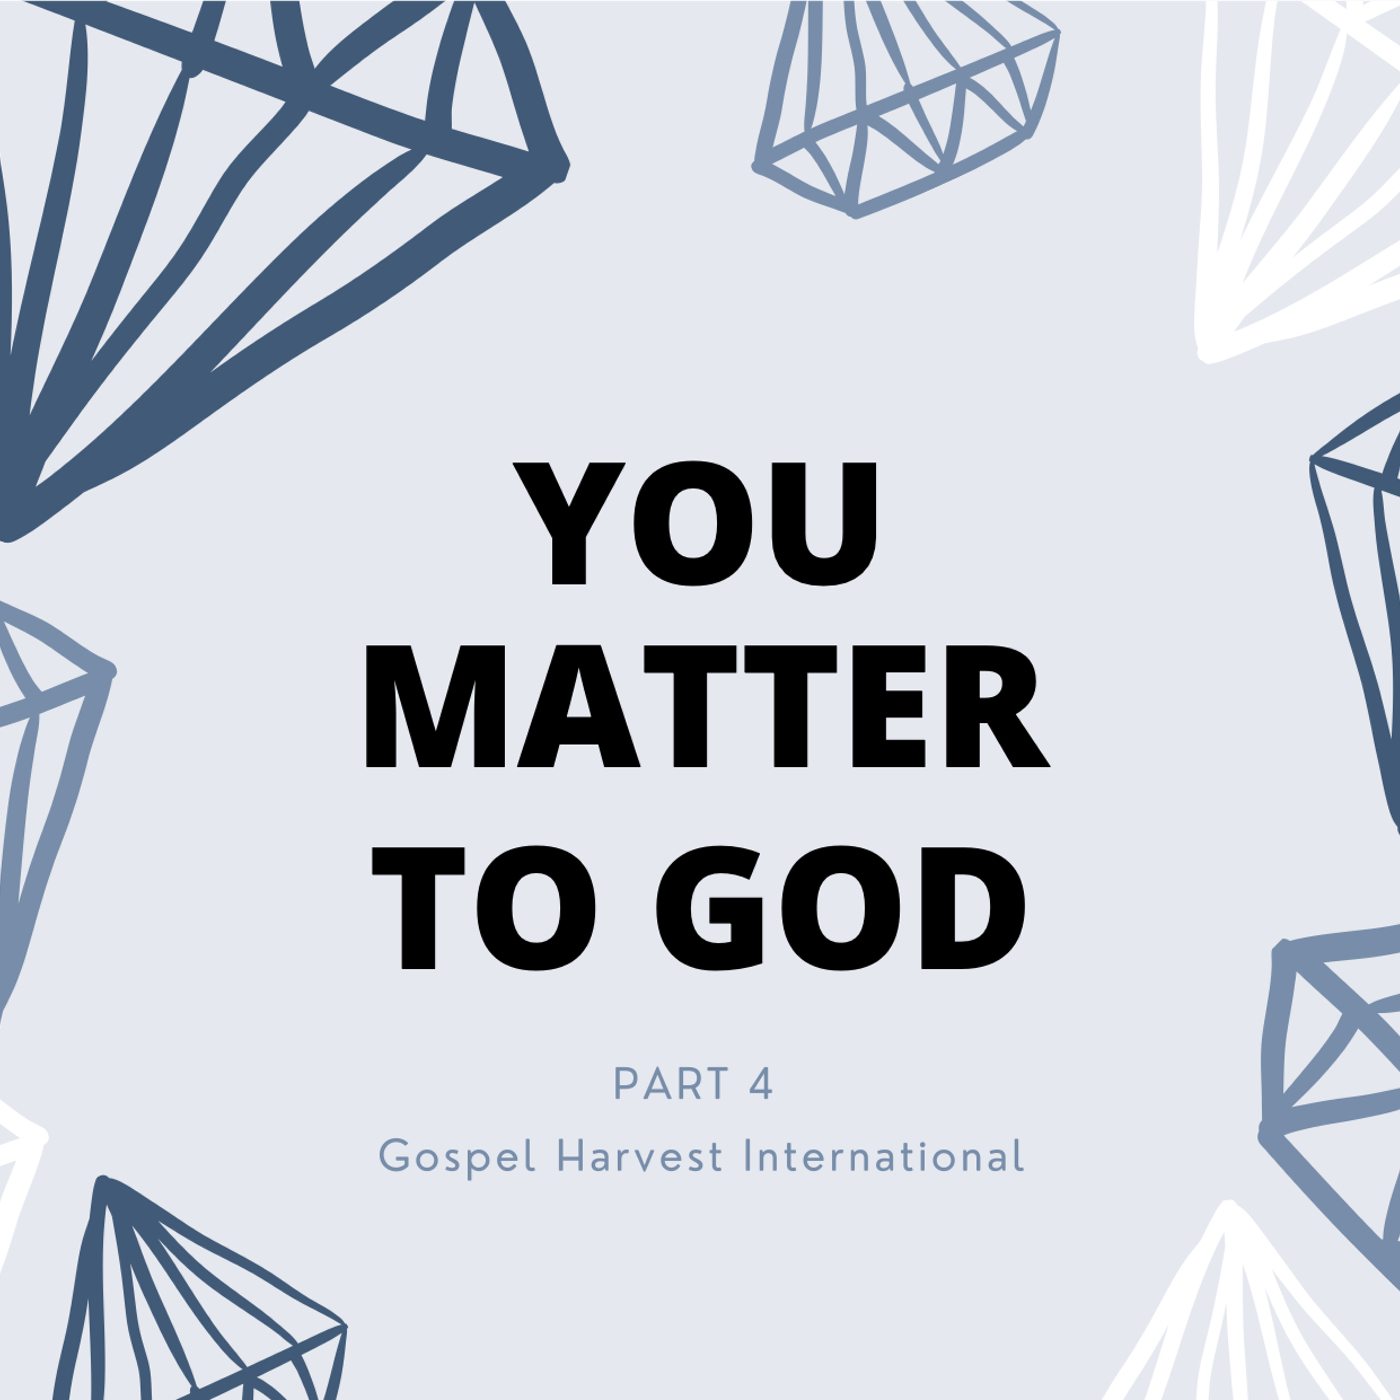 You Matter to God - Part 4 Image